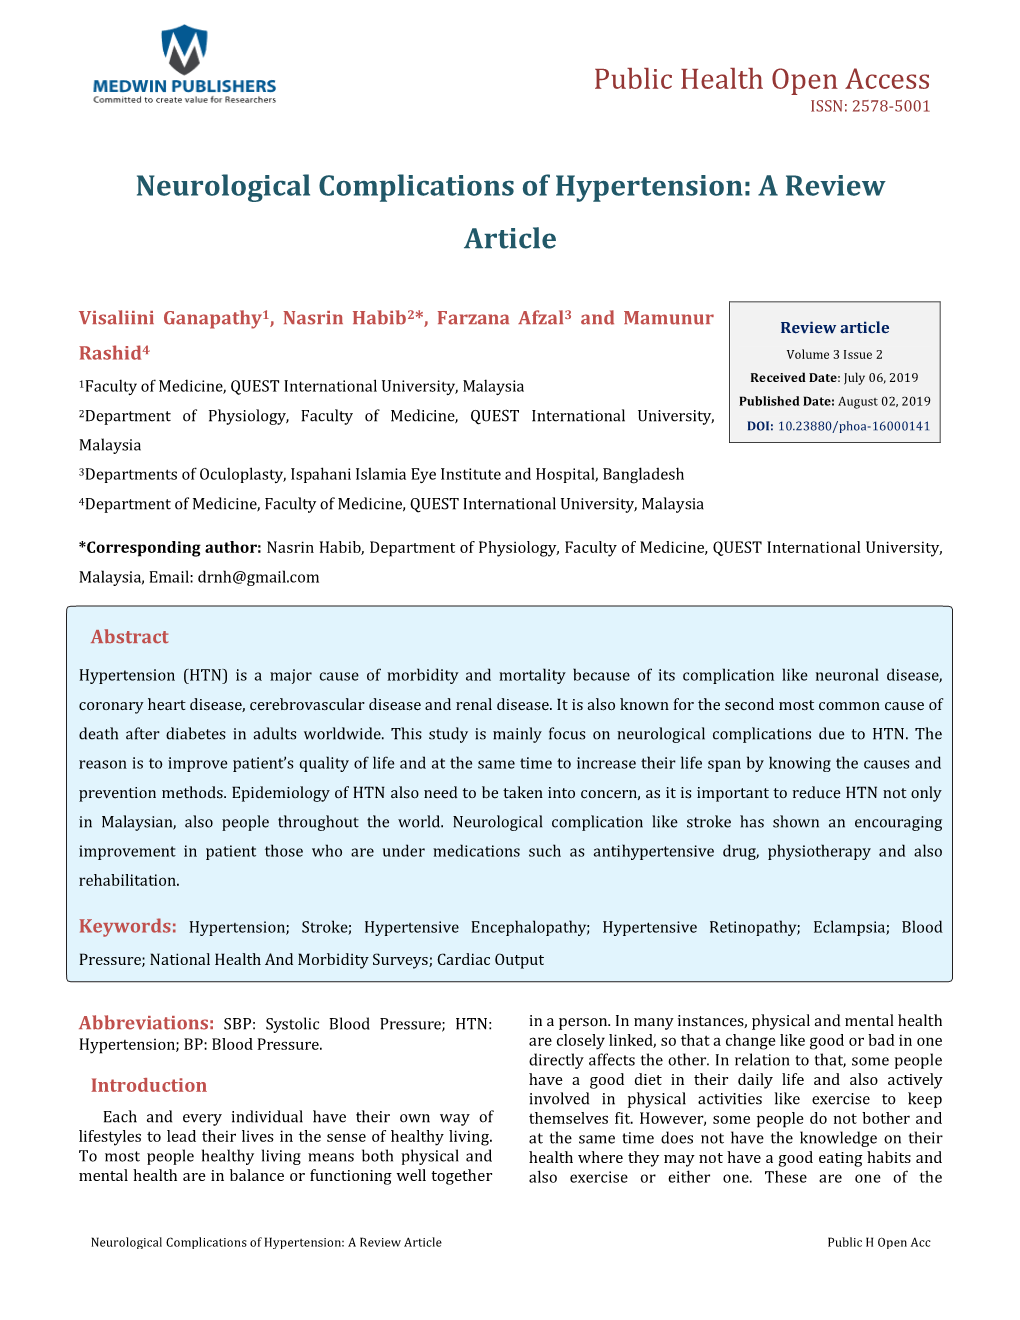 Neurological Complications of Hypertension: a Review Article